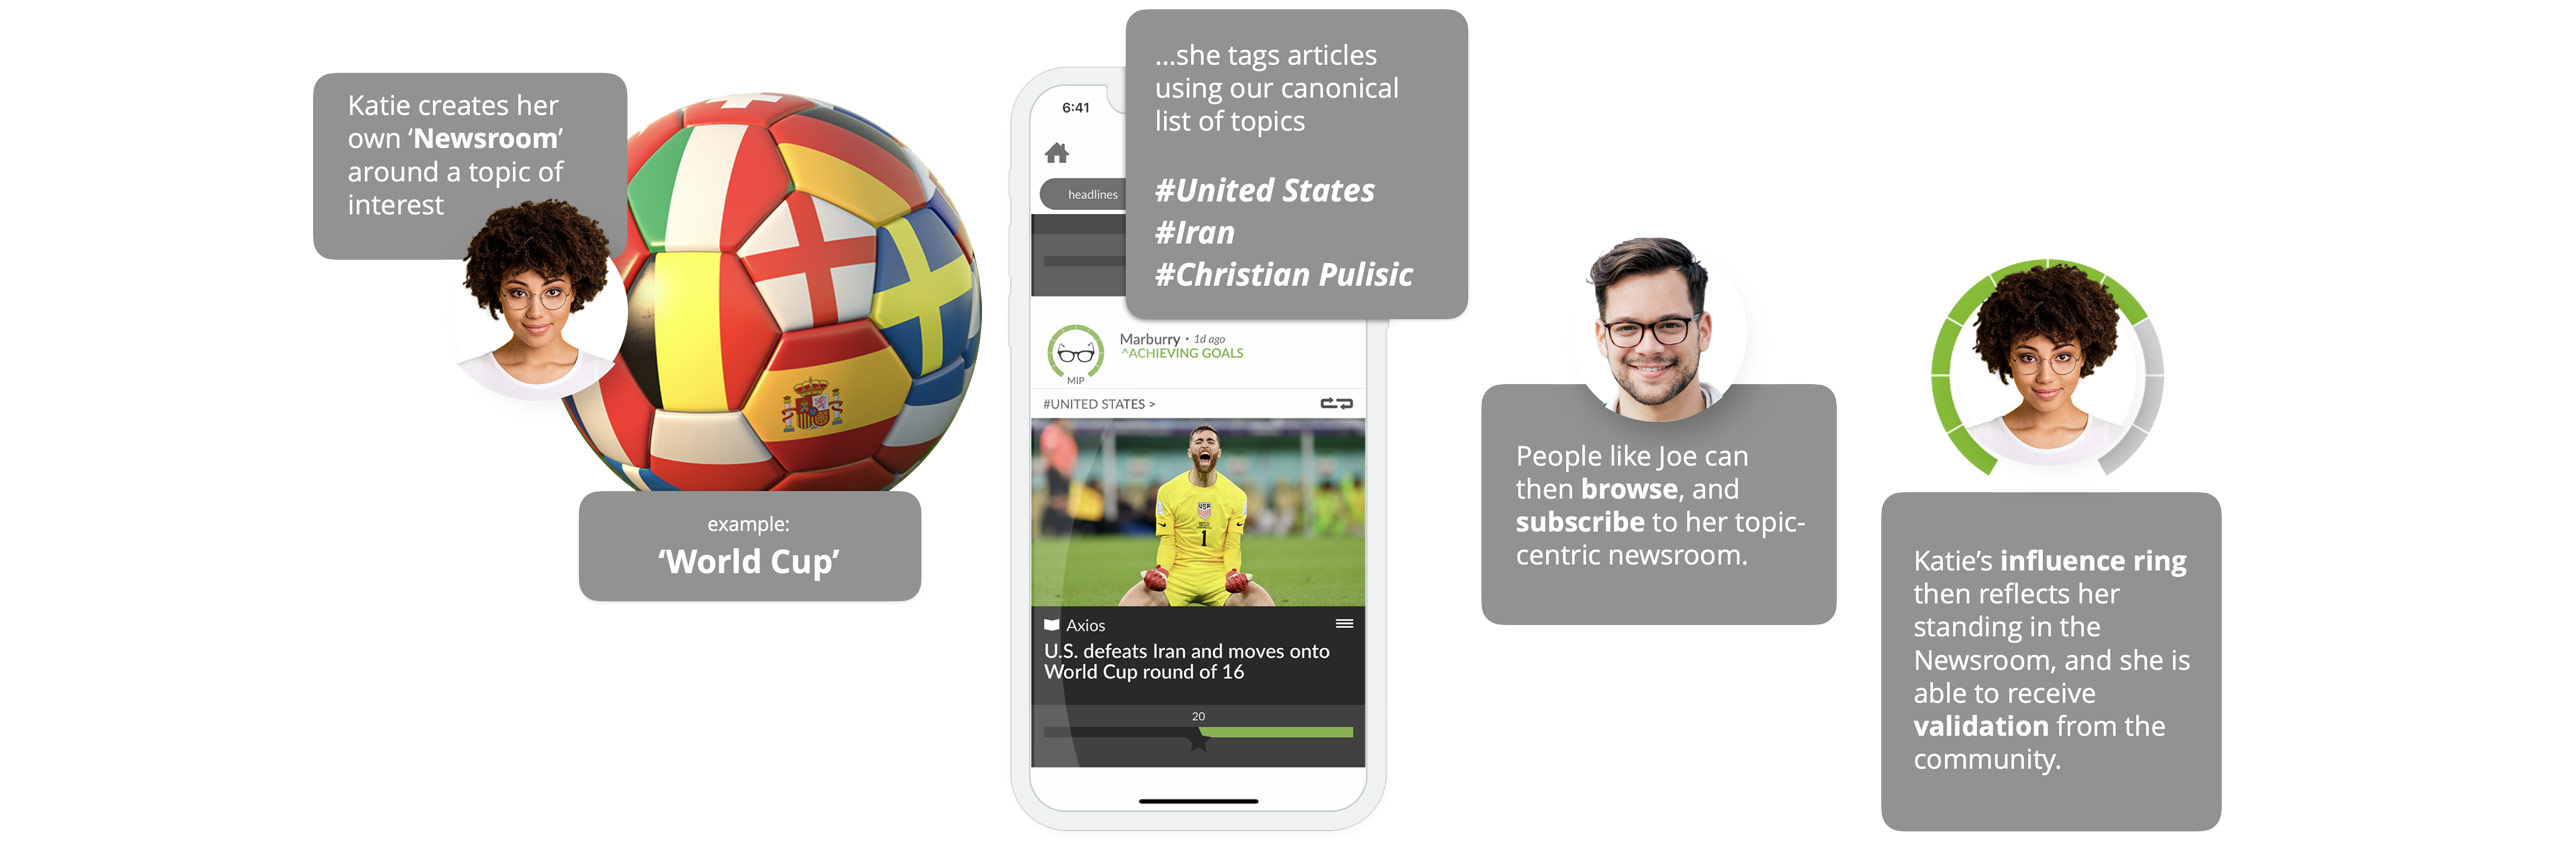 News curation app to redesign how we share articles